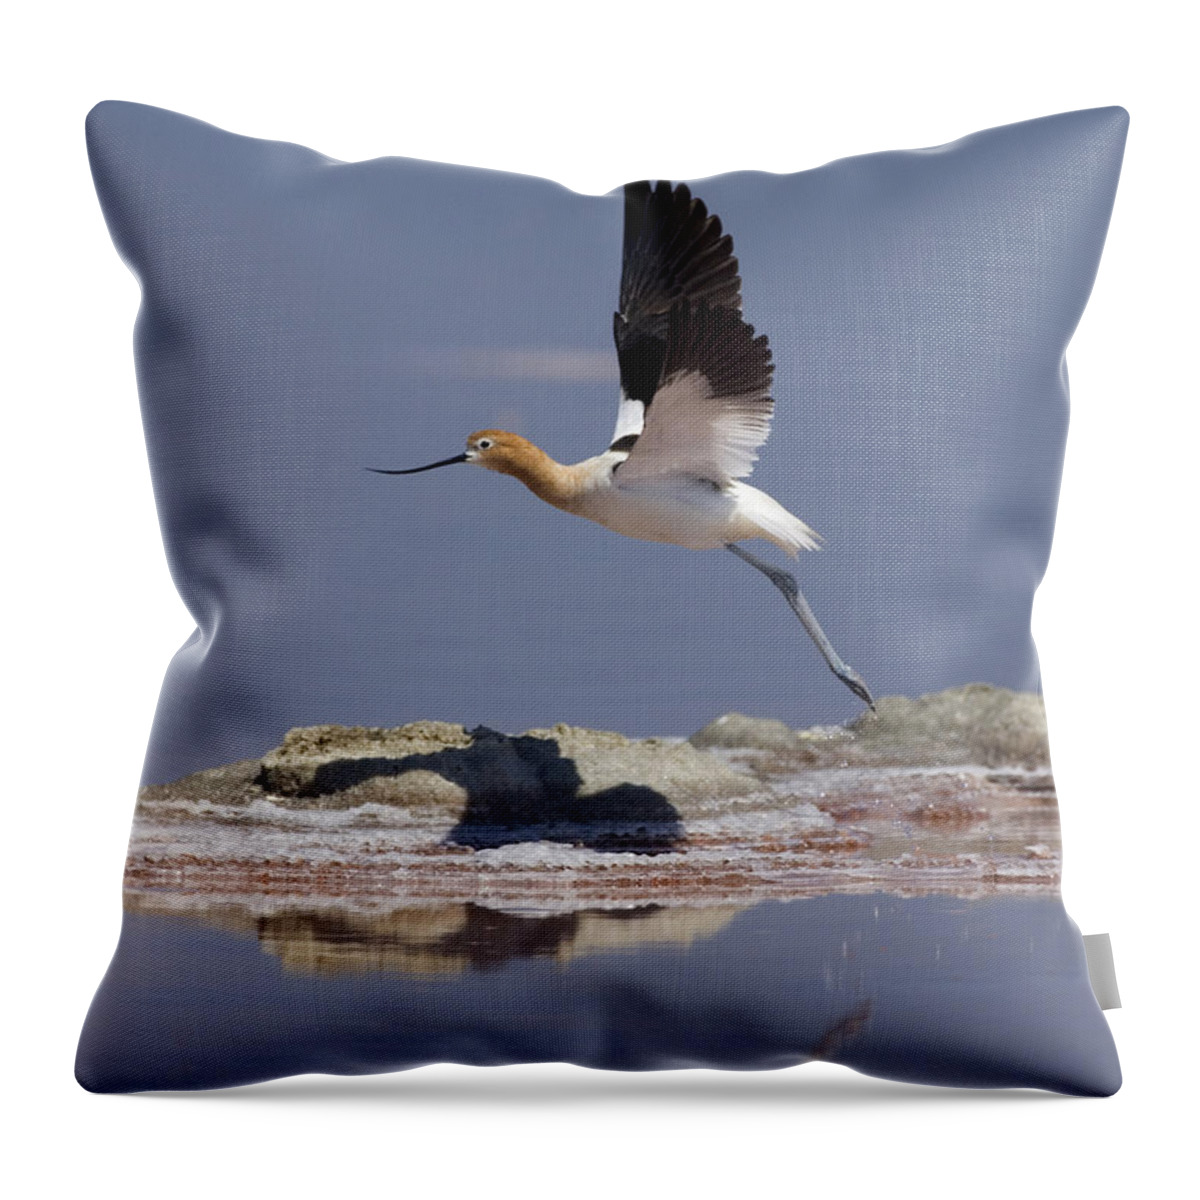 American Avocet Throw Pillow featuring the photograph American Avocet by Anthony Mercieca